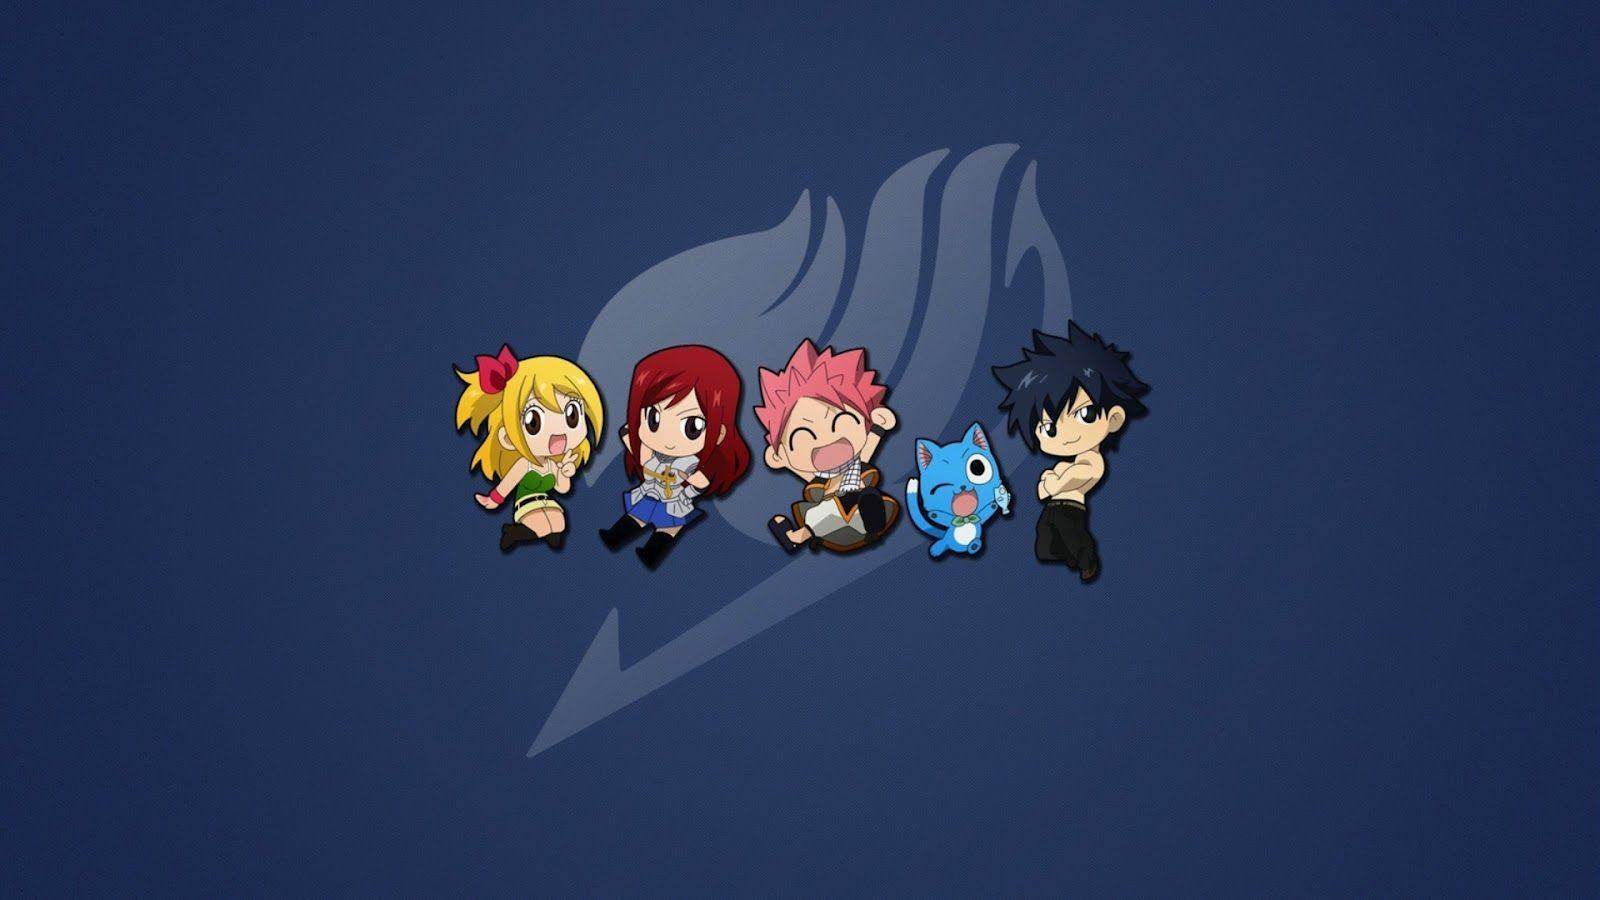 Your Wallpaper: Fairy Tail Wallpaper